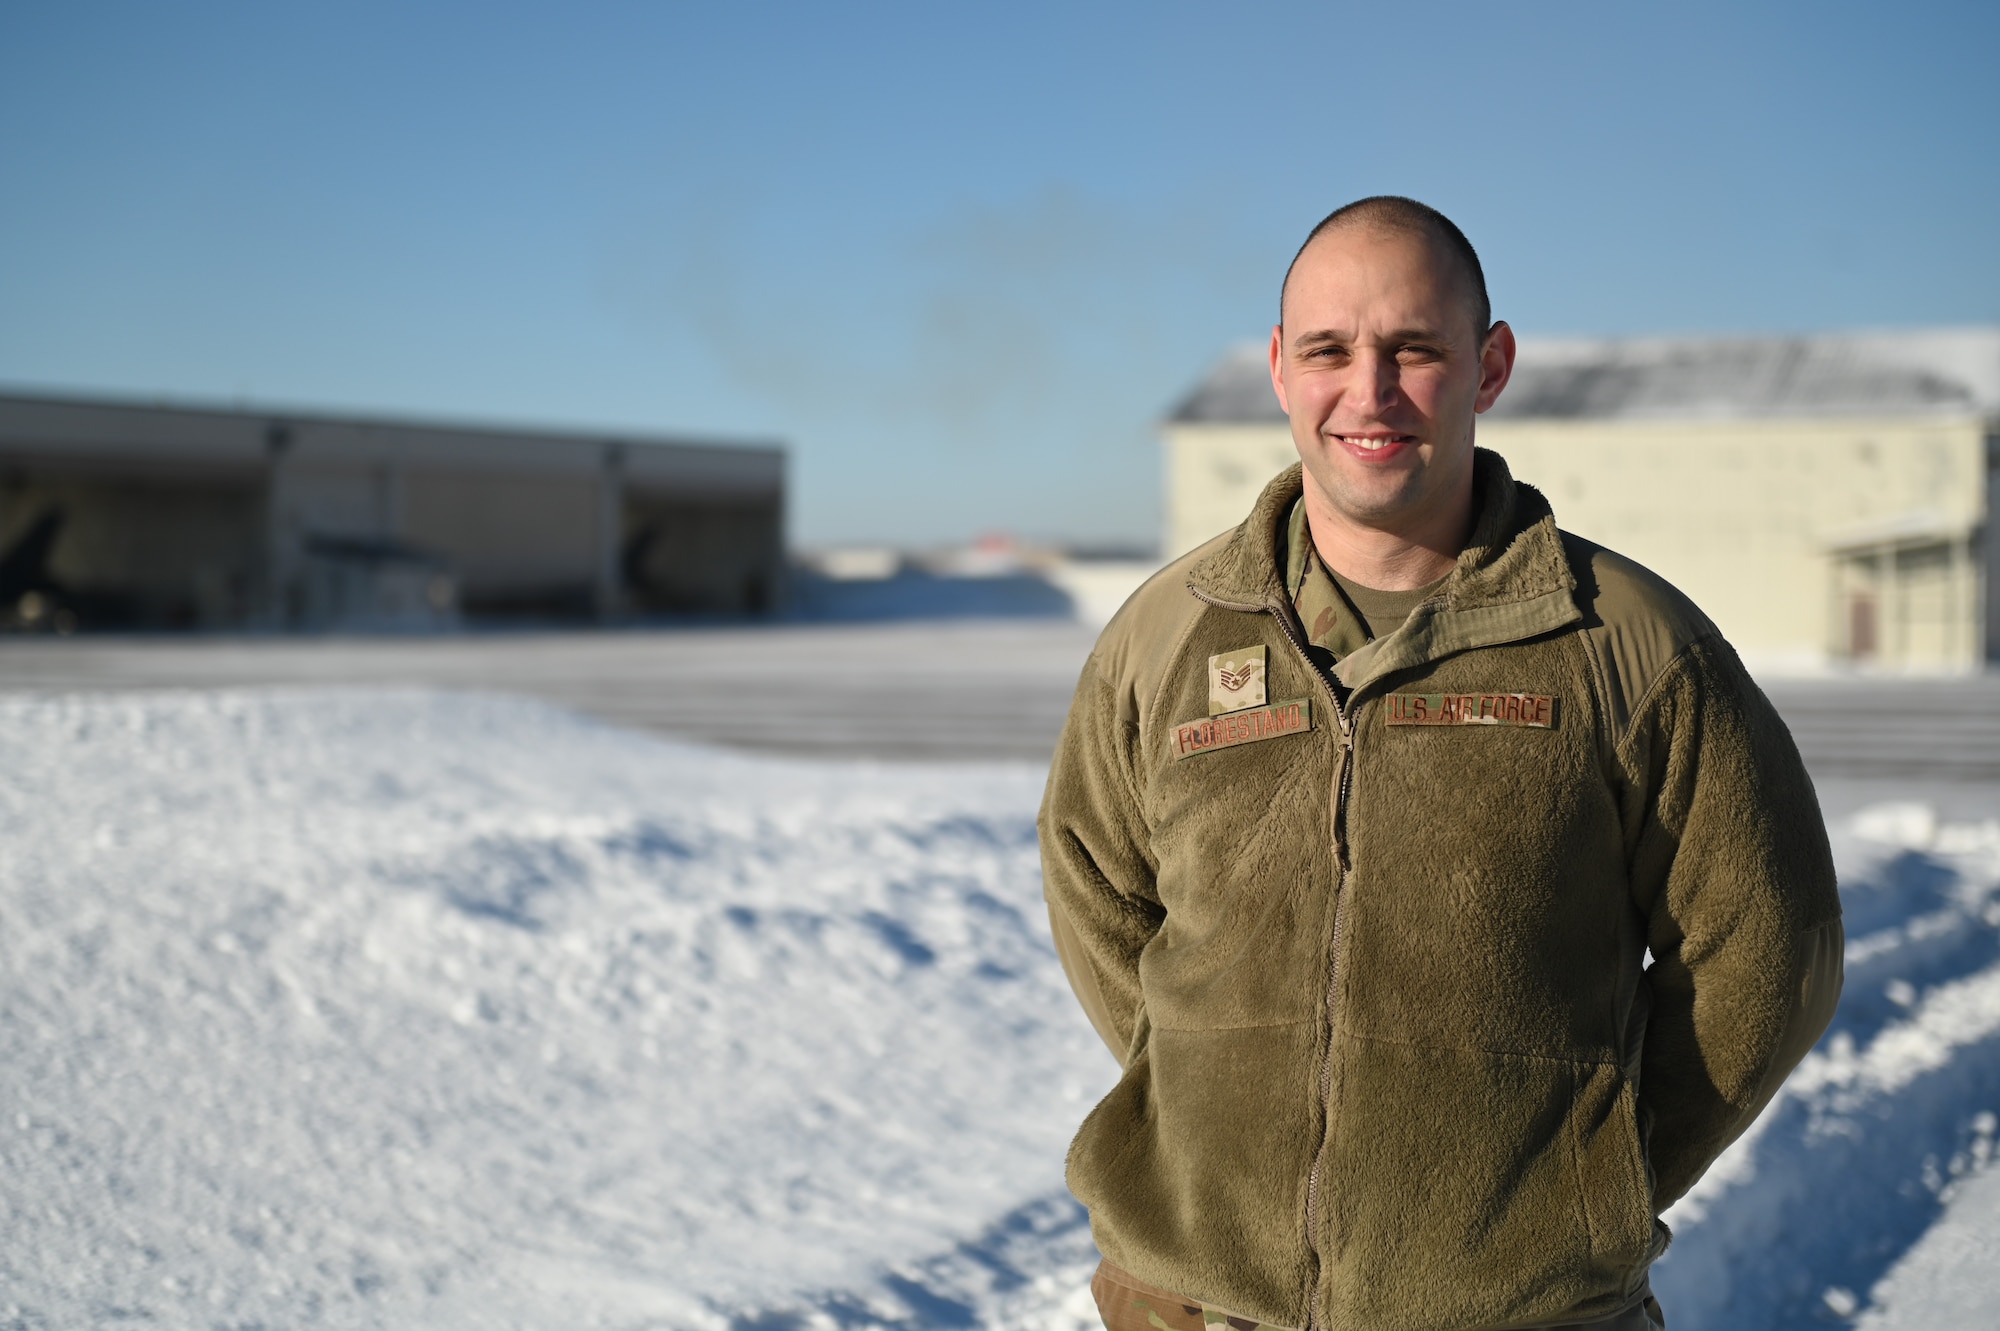 U.S. Air National Guard airfield management operations specialist, Staff Sgt. Matt Florestano poses for a photo at the 148th Fighter Wing, Minnesota Air National Guard on February 24, 2023. Florestana is one of seven airmen assigned to the 148th Fighter Wing who earned the highest possible ASVAB AFQT score of 99.